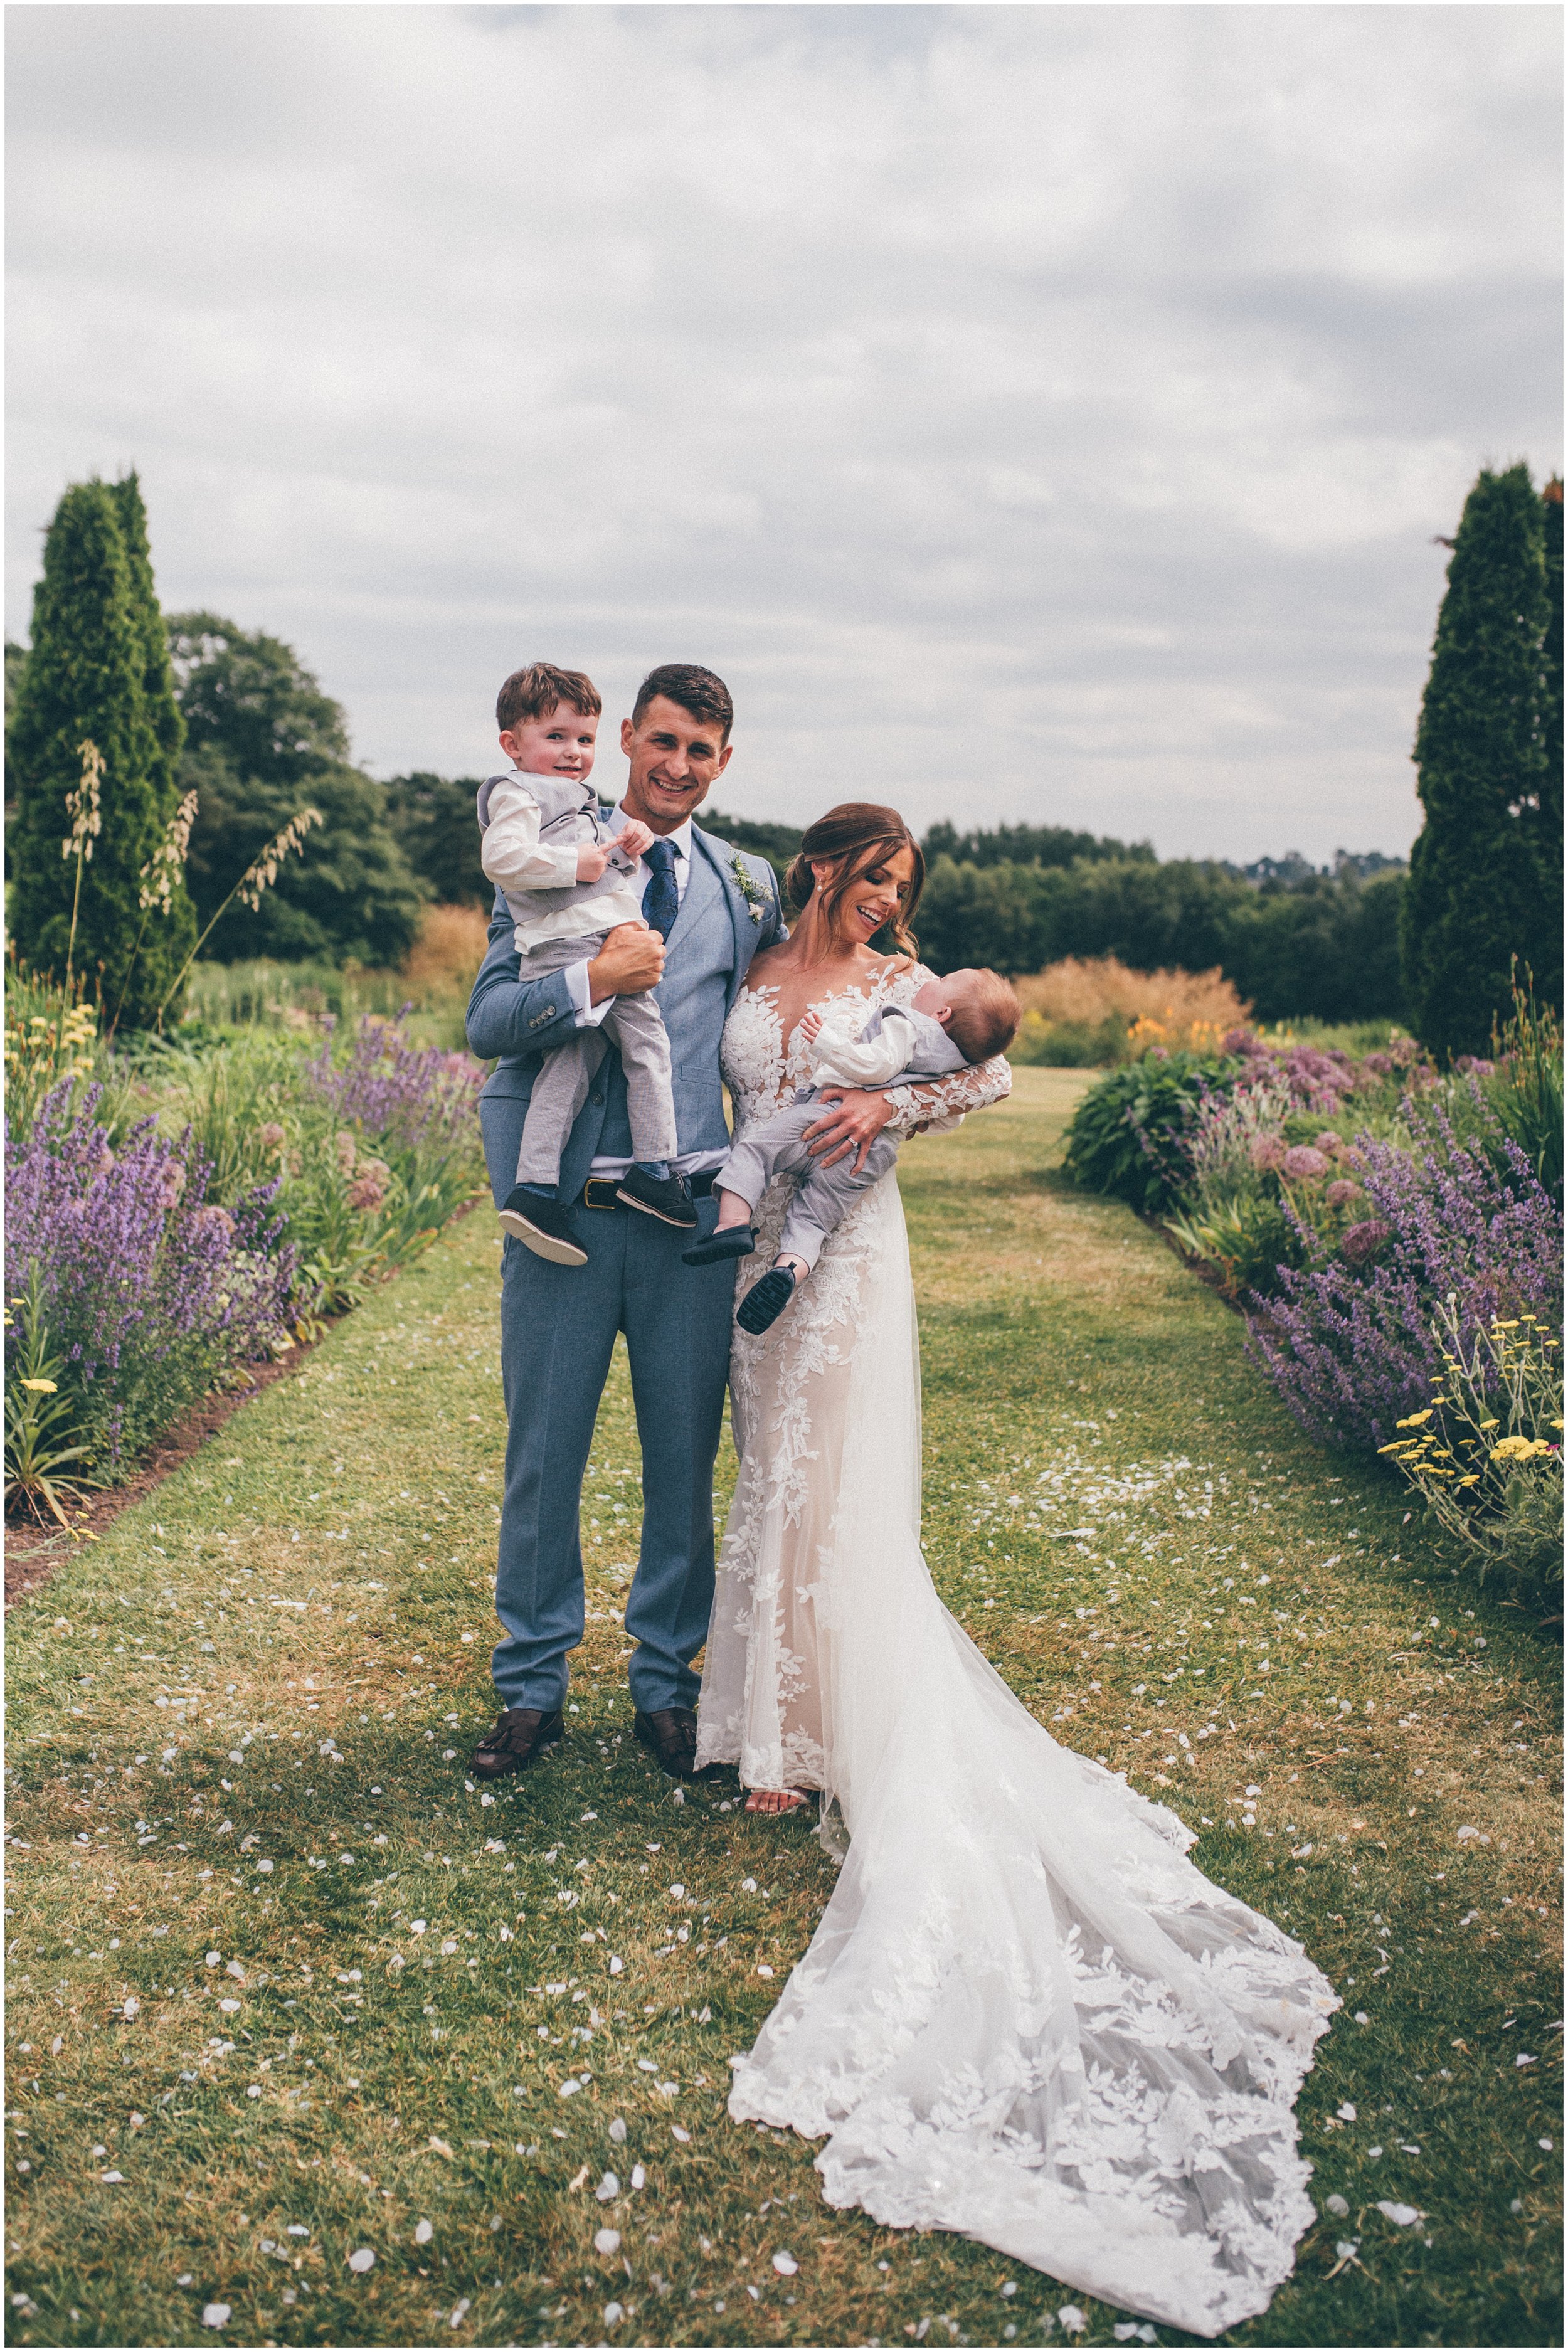 Beautiful bride and her family enjoy the pretty gardens at Abbeywood Estate in Delamere, Cheshire.